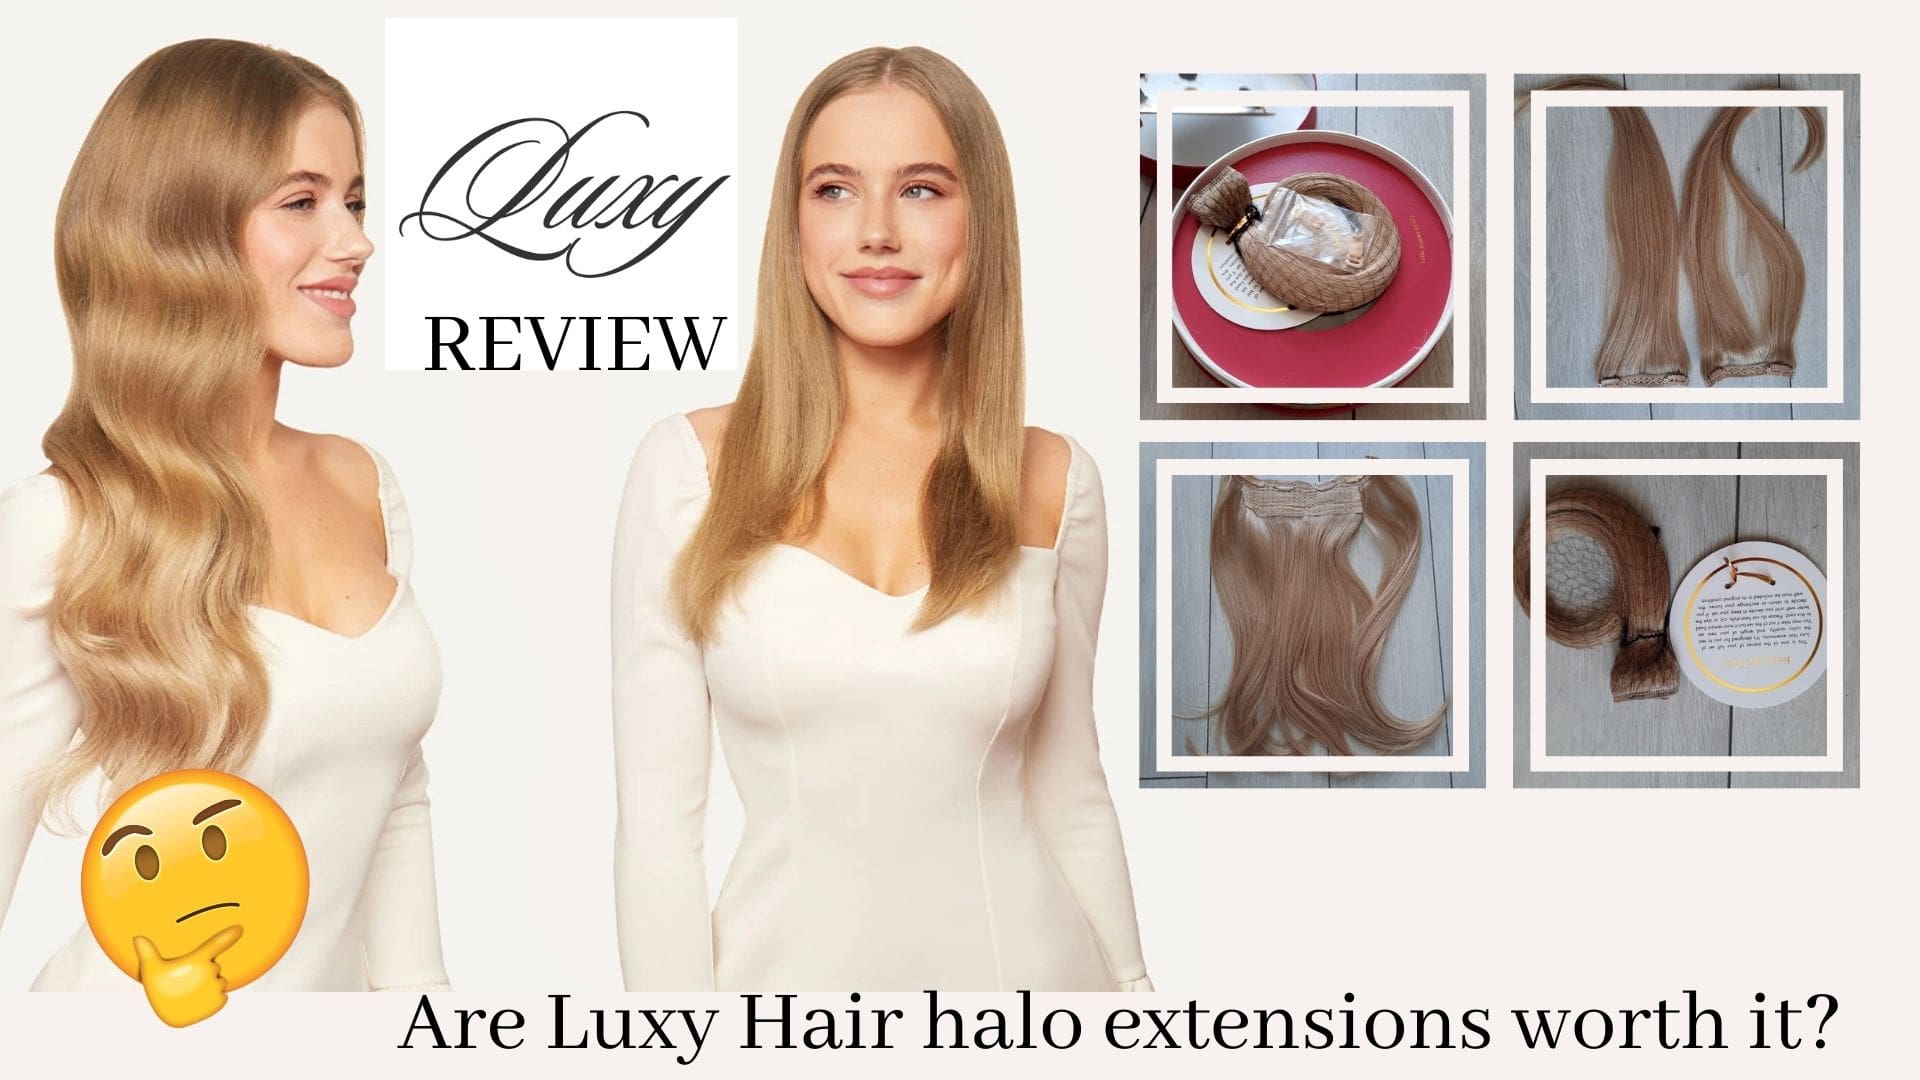 Luxy Hair Halo Hair Extensions Honest Review: Are they worth it? [UPDATED  2023] - Hair Shop Reviews